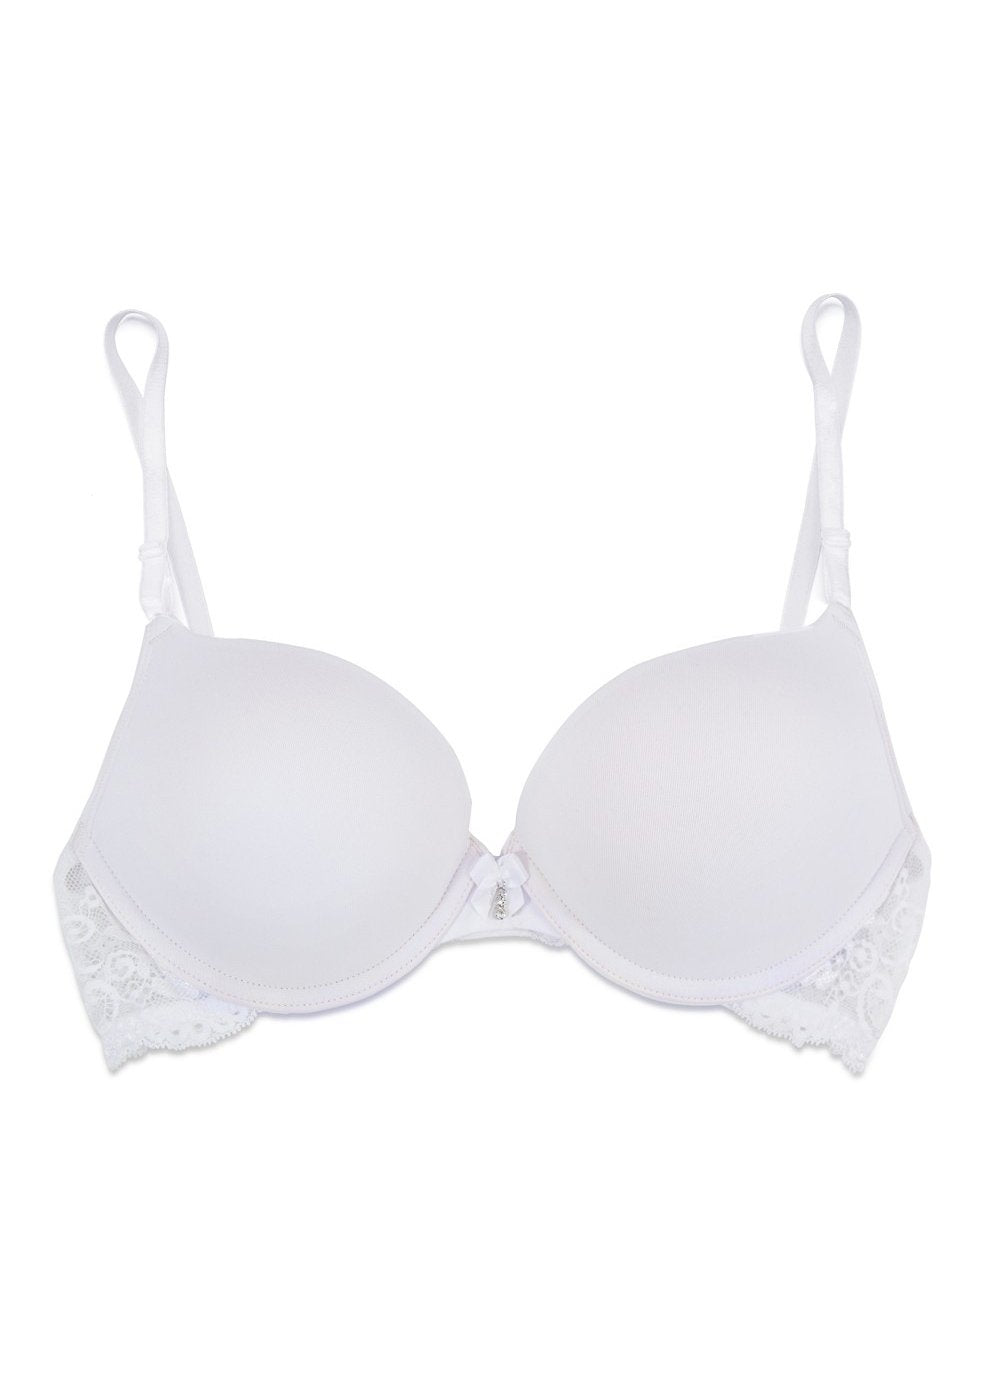 Add Two Cups Bras Brassiere for Women Push Up Padded Unlined (white,36C)  price in UAE,  UAE